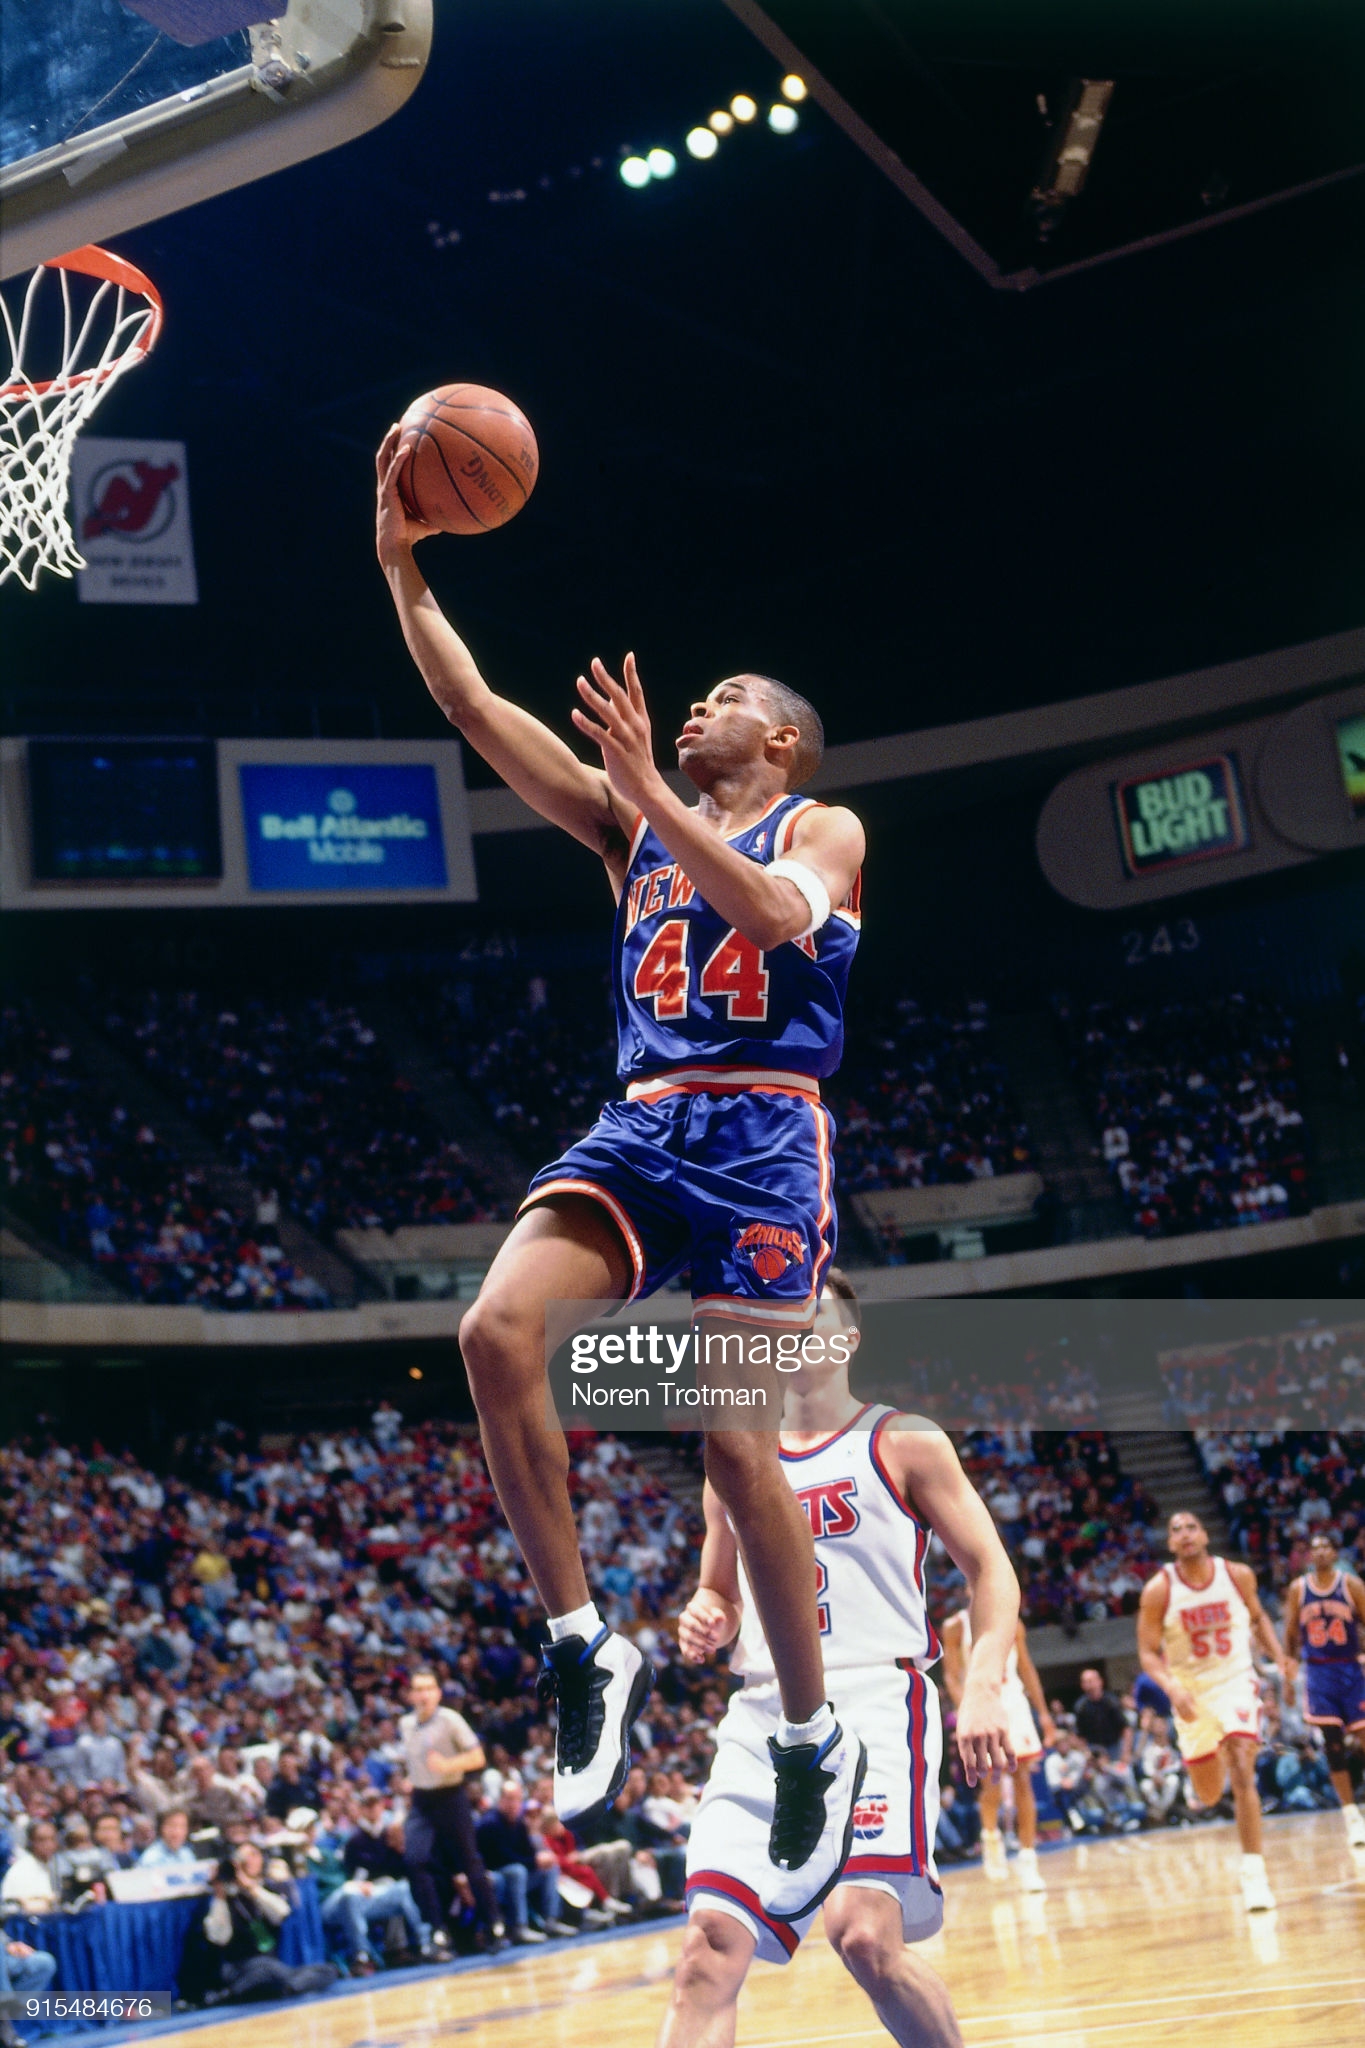 Hubert Davis wearing the AJ10 "New York City" against the Nets on 4/2/1995 from Norem Trotman